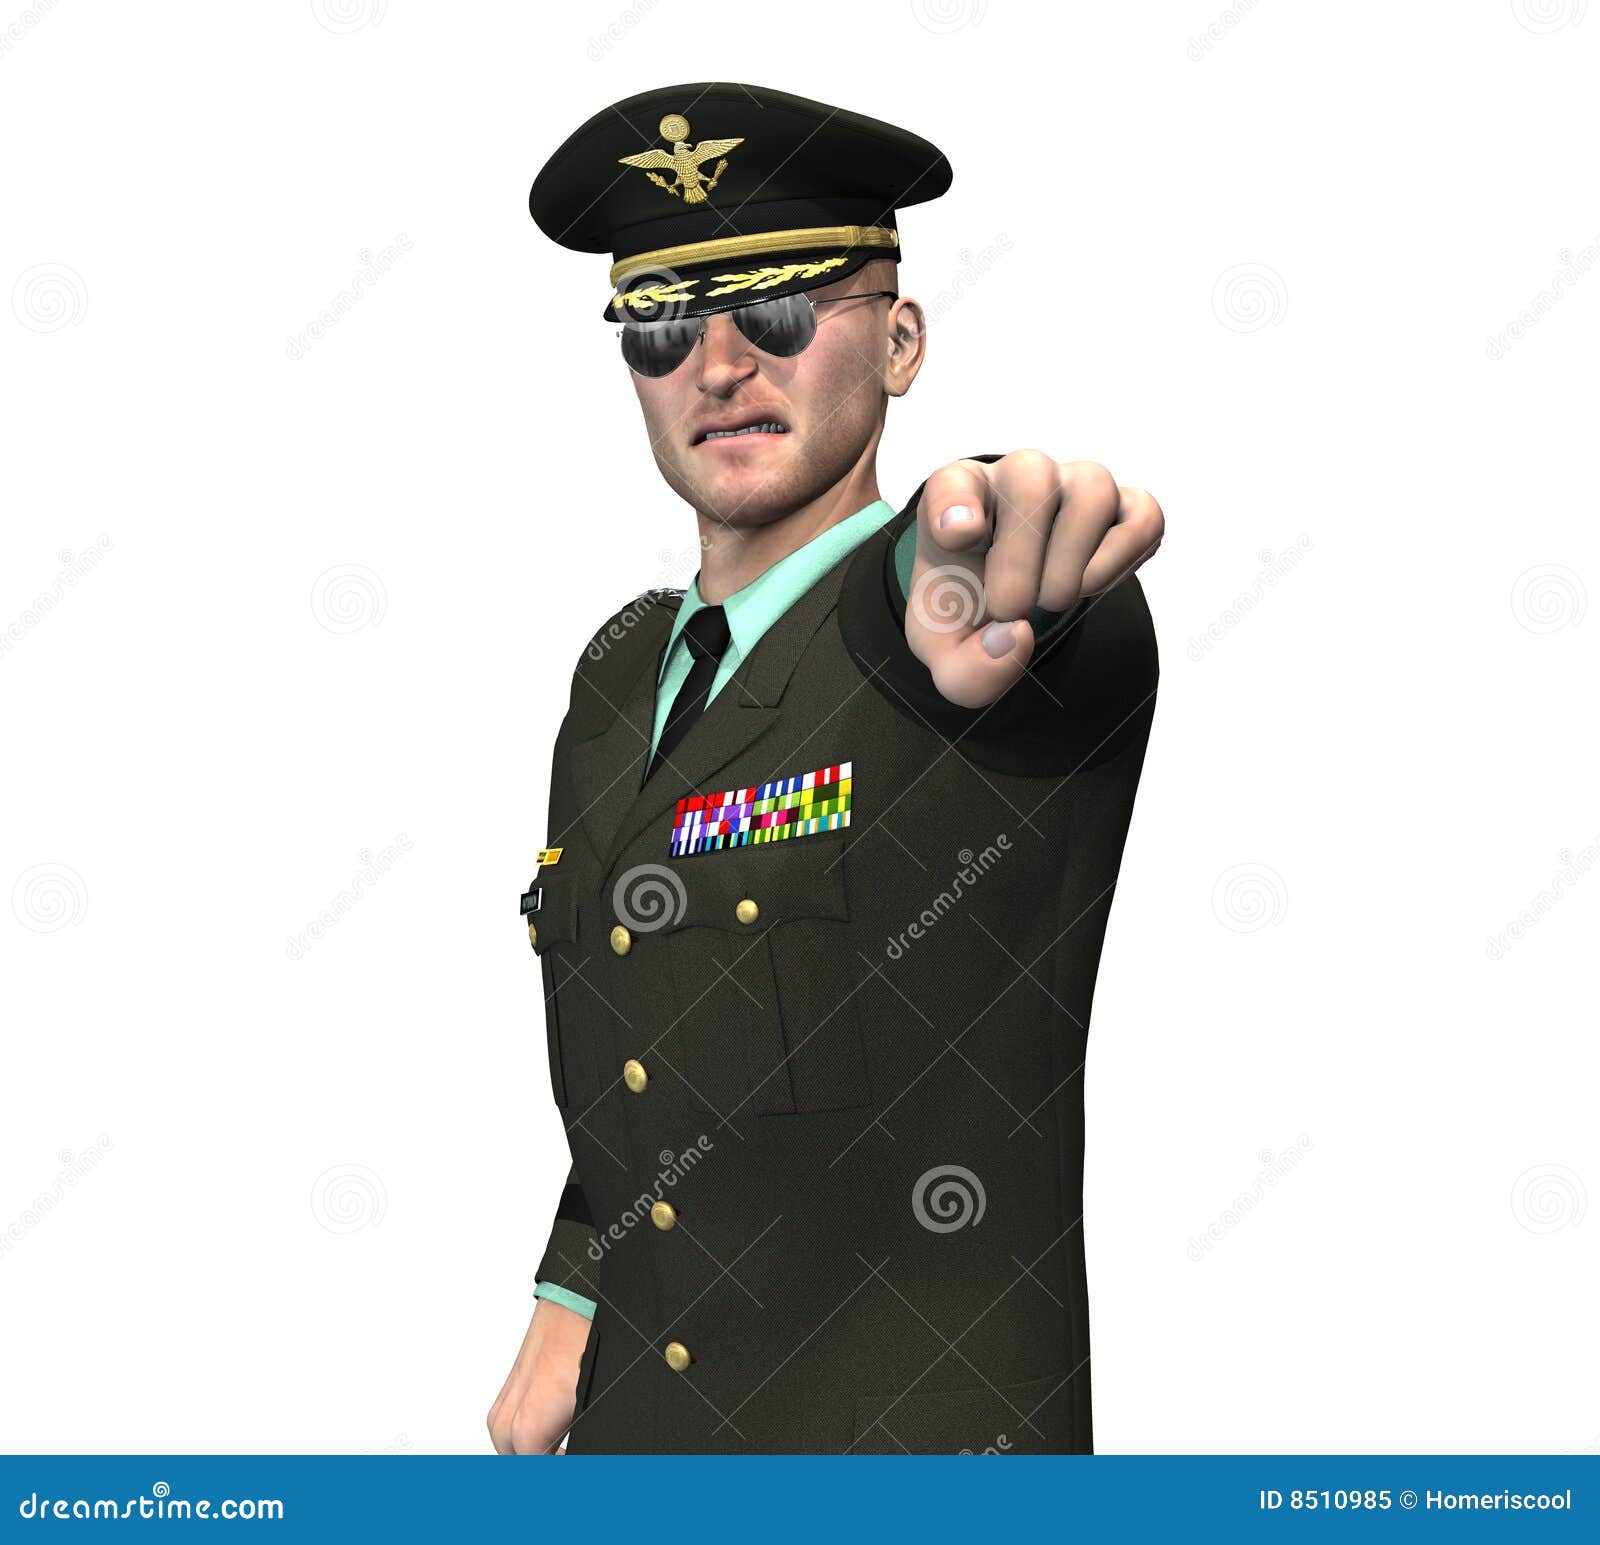 military officer clipart - photo #50